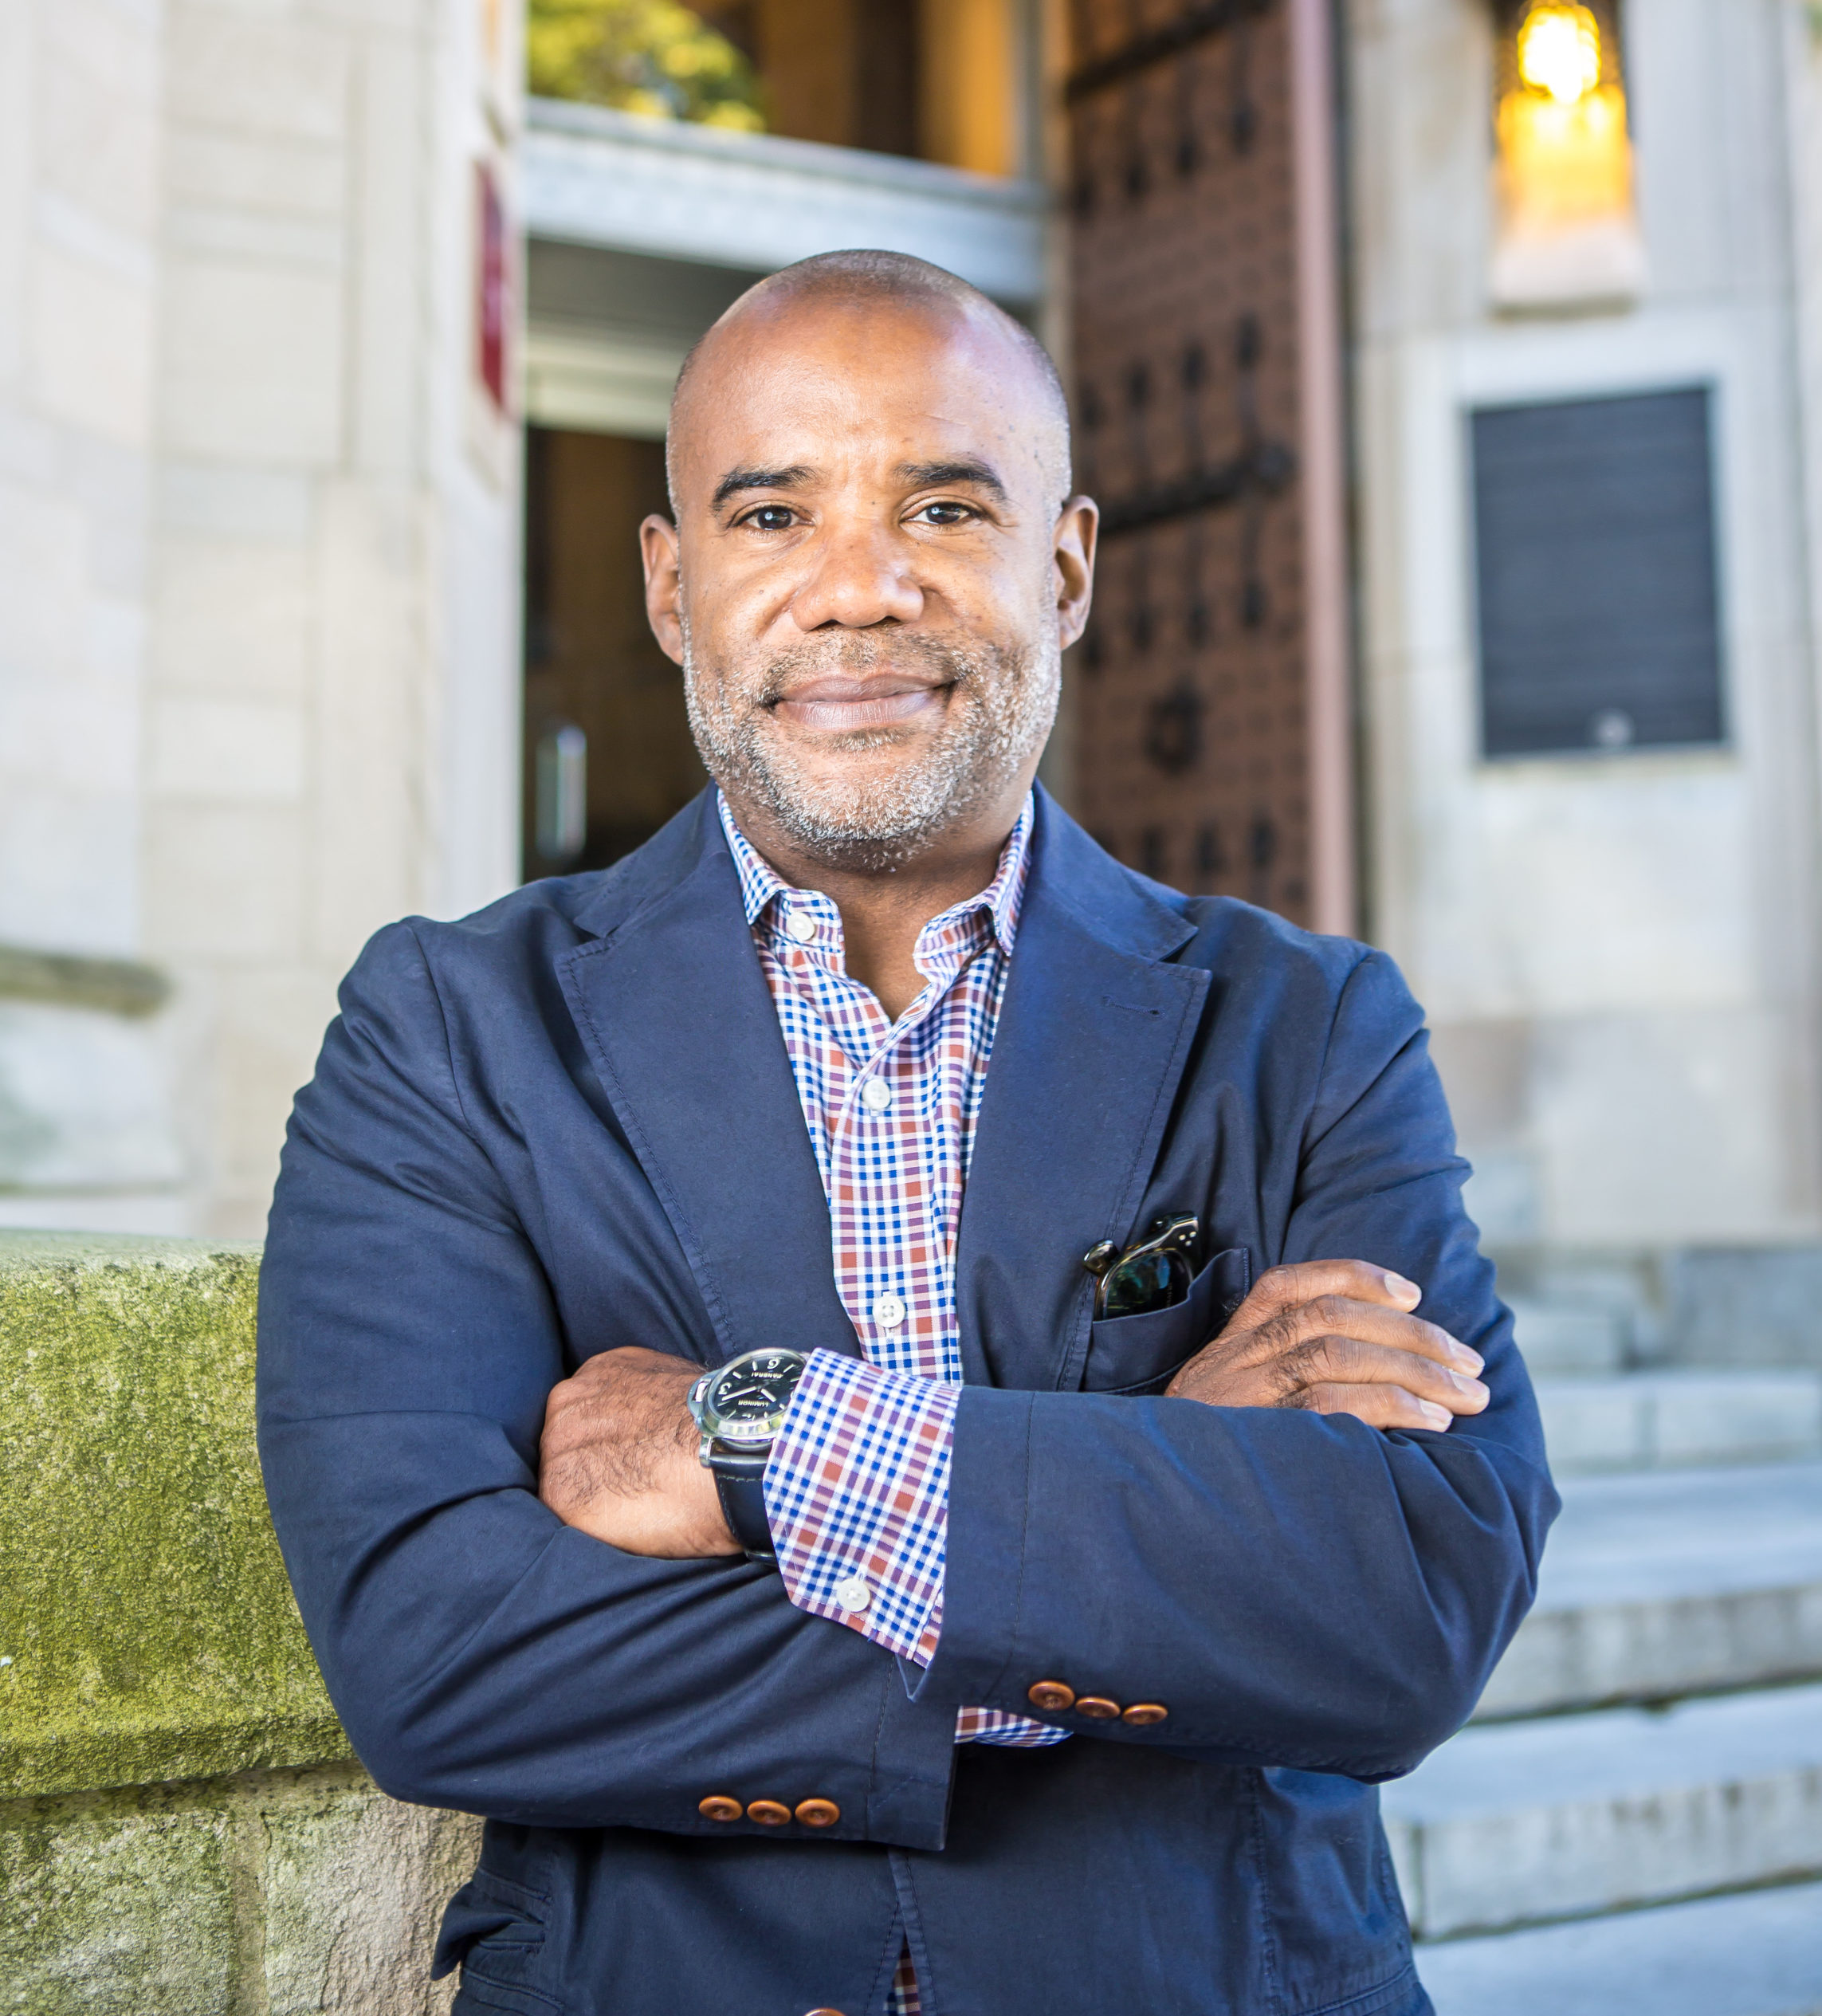 Portrait of Bryan Samuels, Executive Director of Chapin Hill, on Tuesday, August 23, 2016 at Chapin Hall on the University of Chicago campus. (Photo by Nancy Wong)